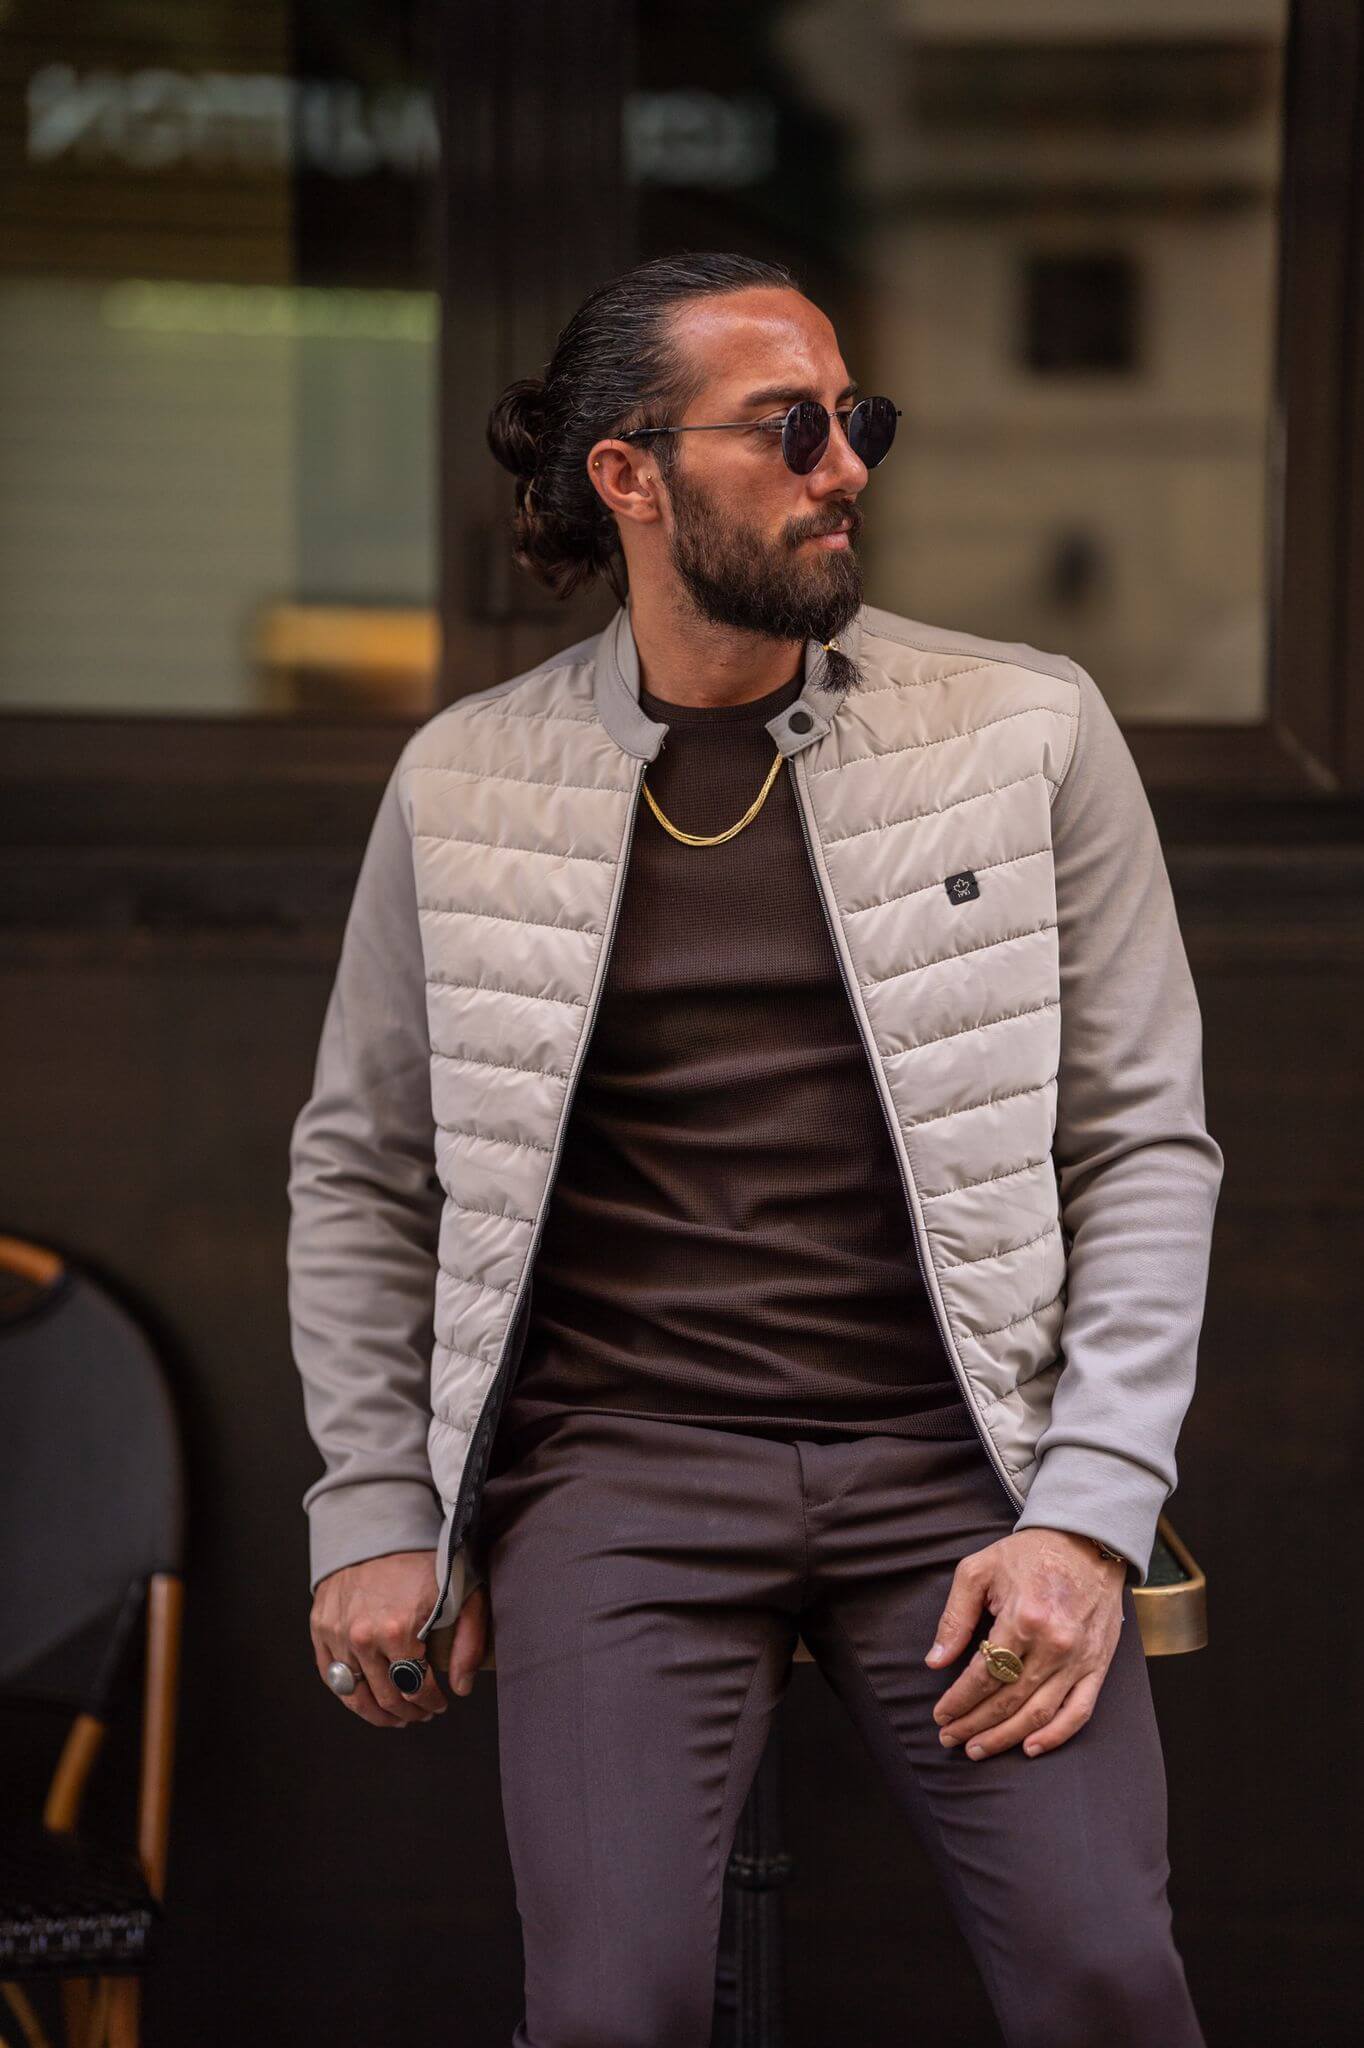 The epitome of sartorial charm, our male model presents a striking image in a beige coat.